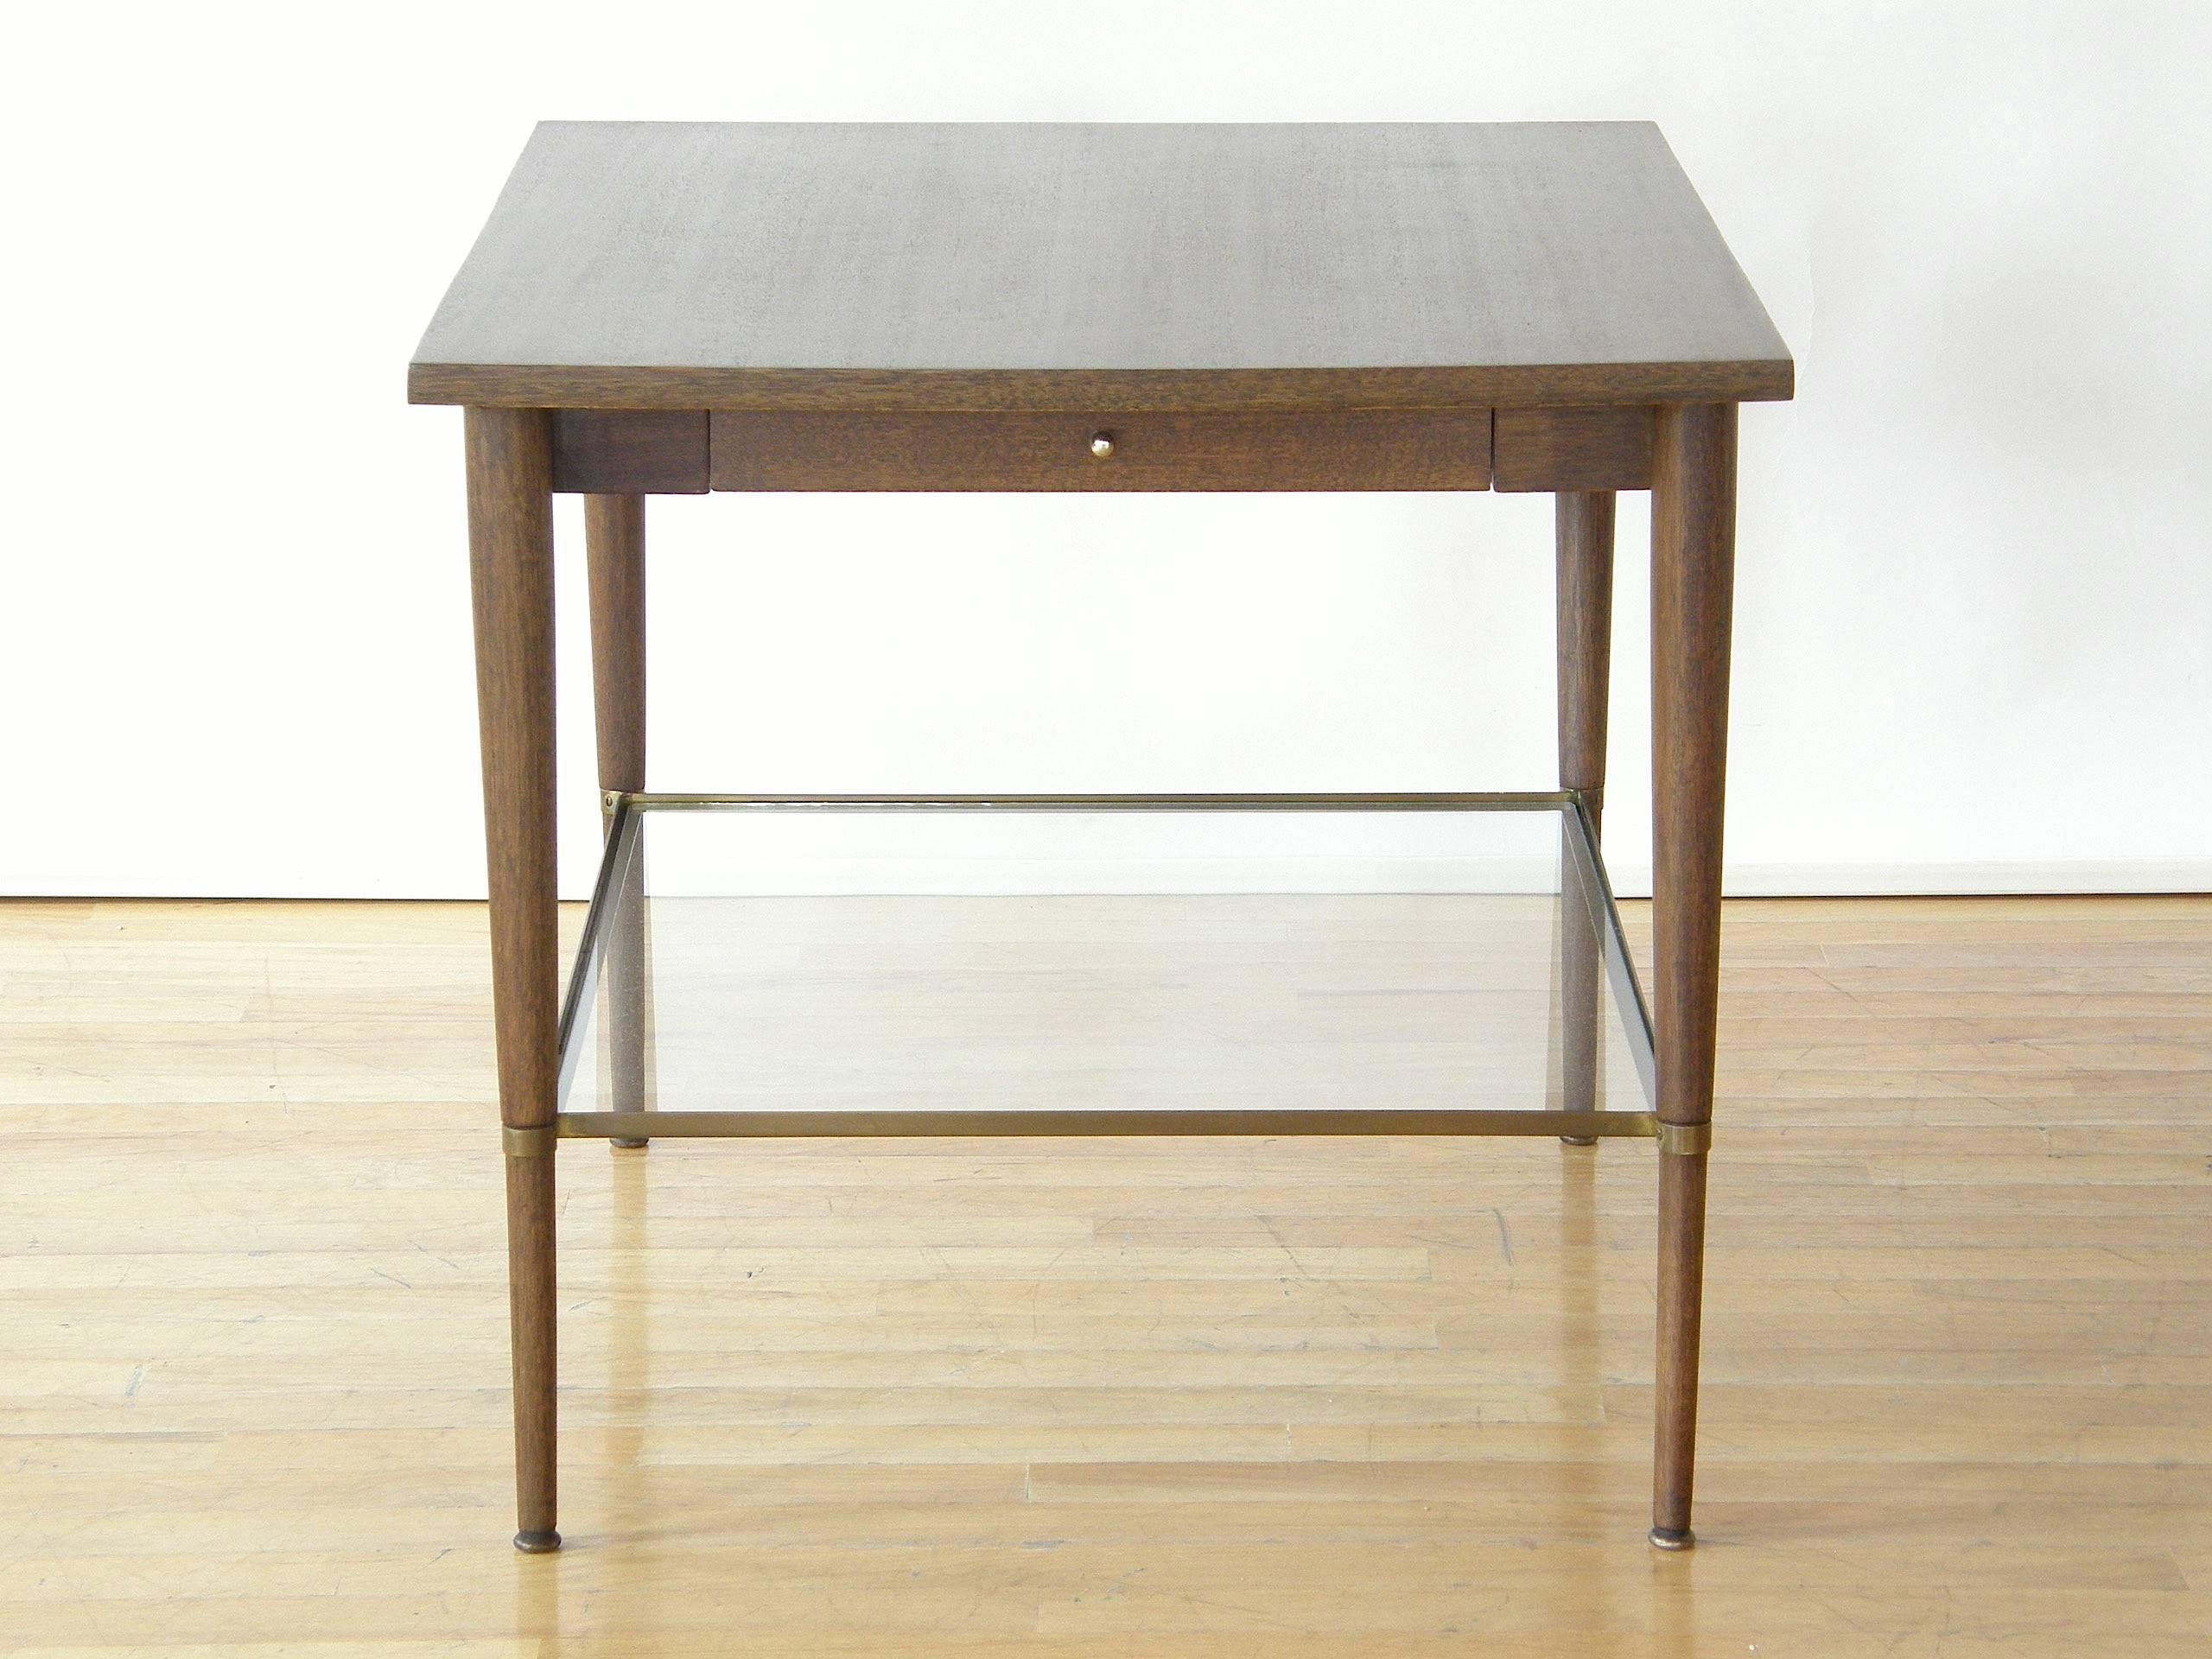 Side or end table with slender drawer and glass shelf designed by Paul McCobb. This piece is part of the Connoisseur Collection for H. Sacks and Sons.

Please contact us if you have any questions.